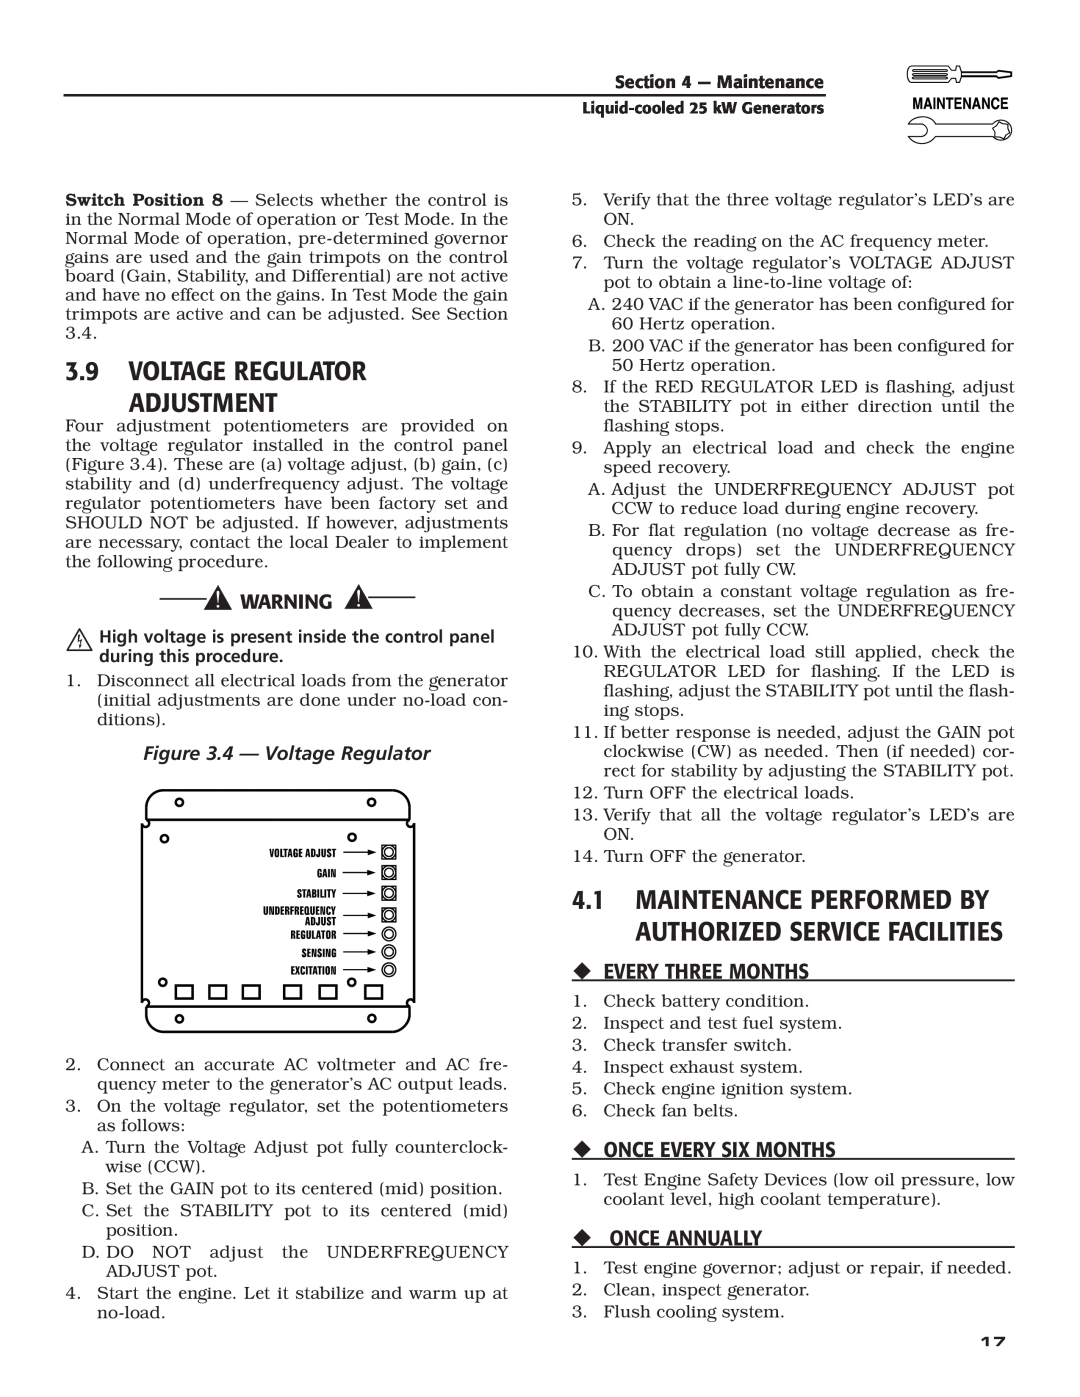 Generac 005031-2 owner manual 3.9VOLTAGE REGULATOR ADJUSTMENT, ‹Every Three Months, ‹Once Every Six Months, ‹Once Annually 